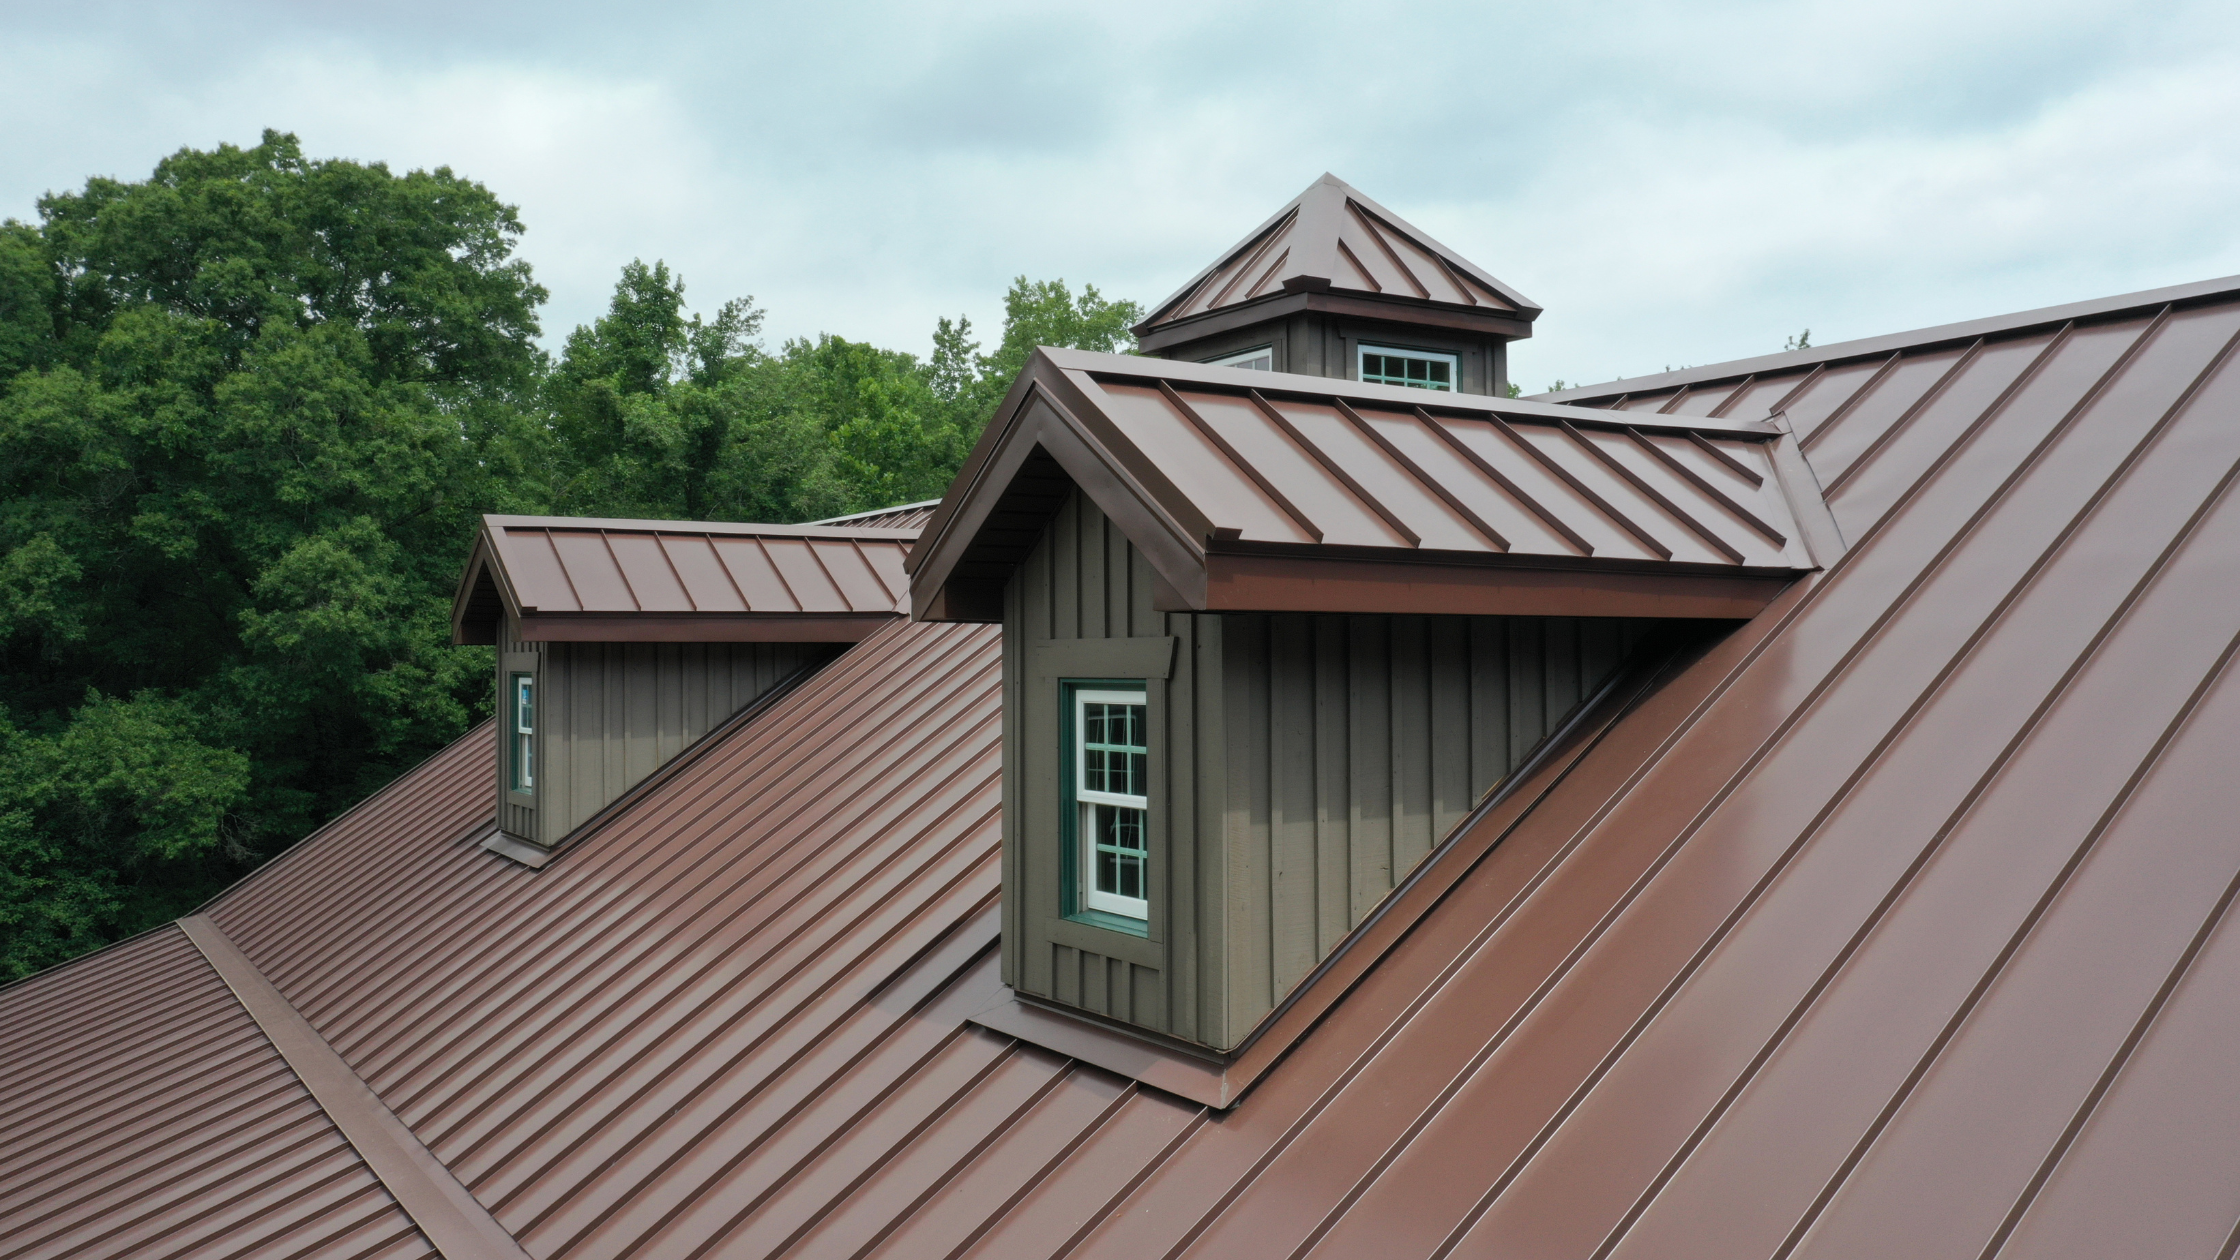 Is a Metal Roof Worth It? Pros and Cons of Metal Roofing